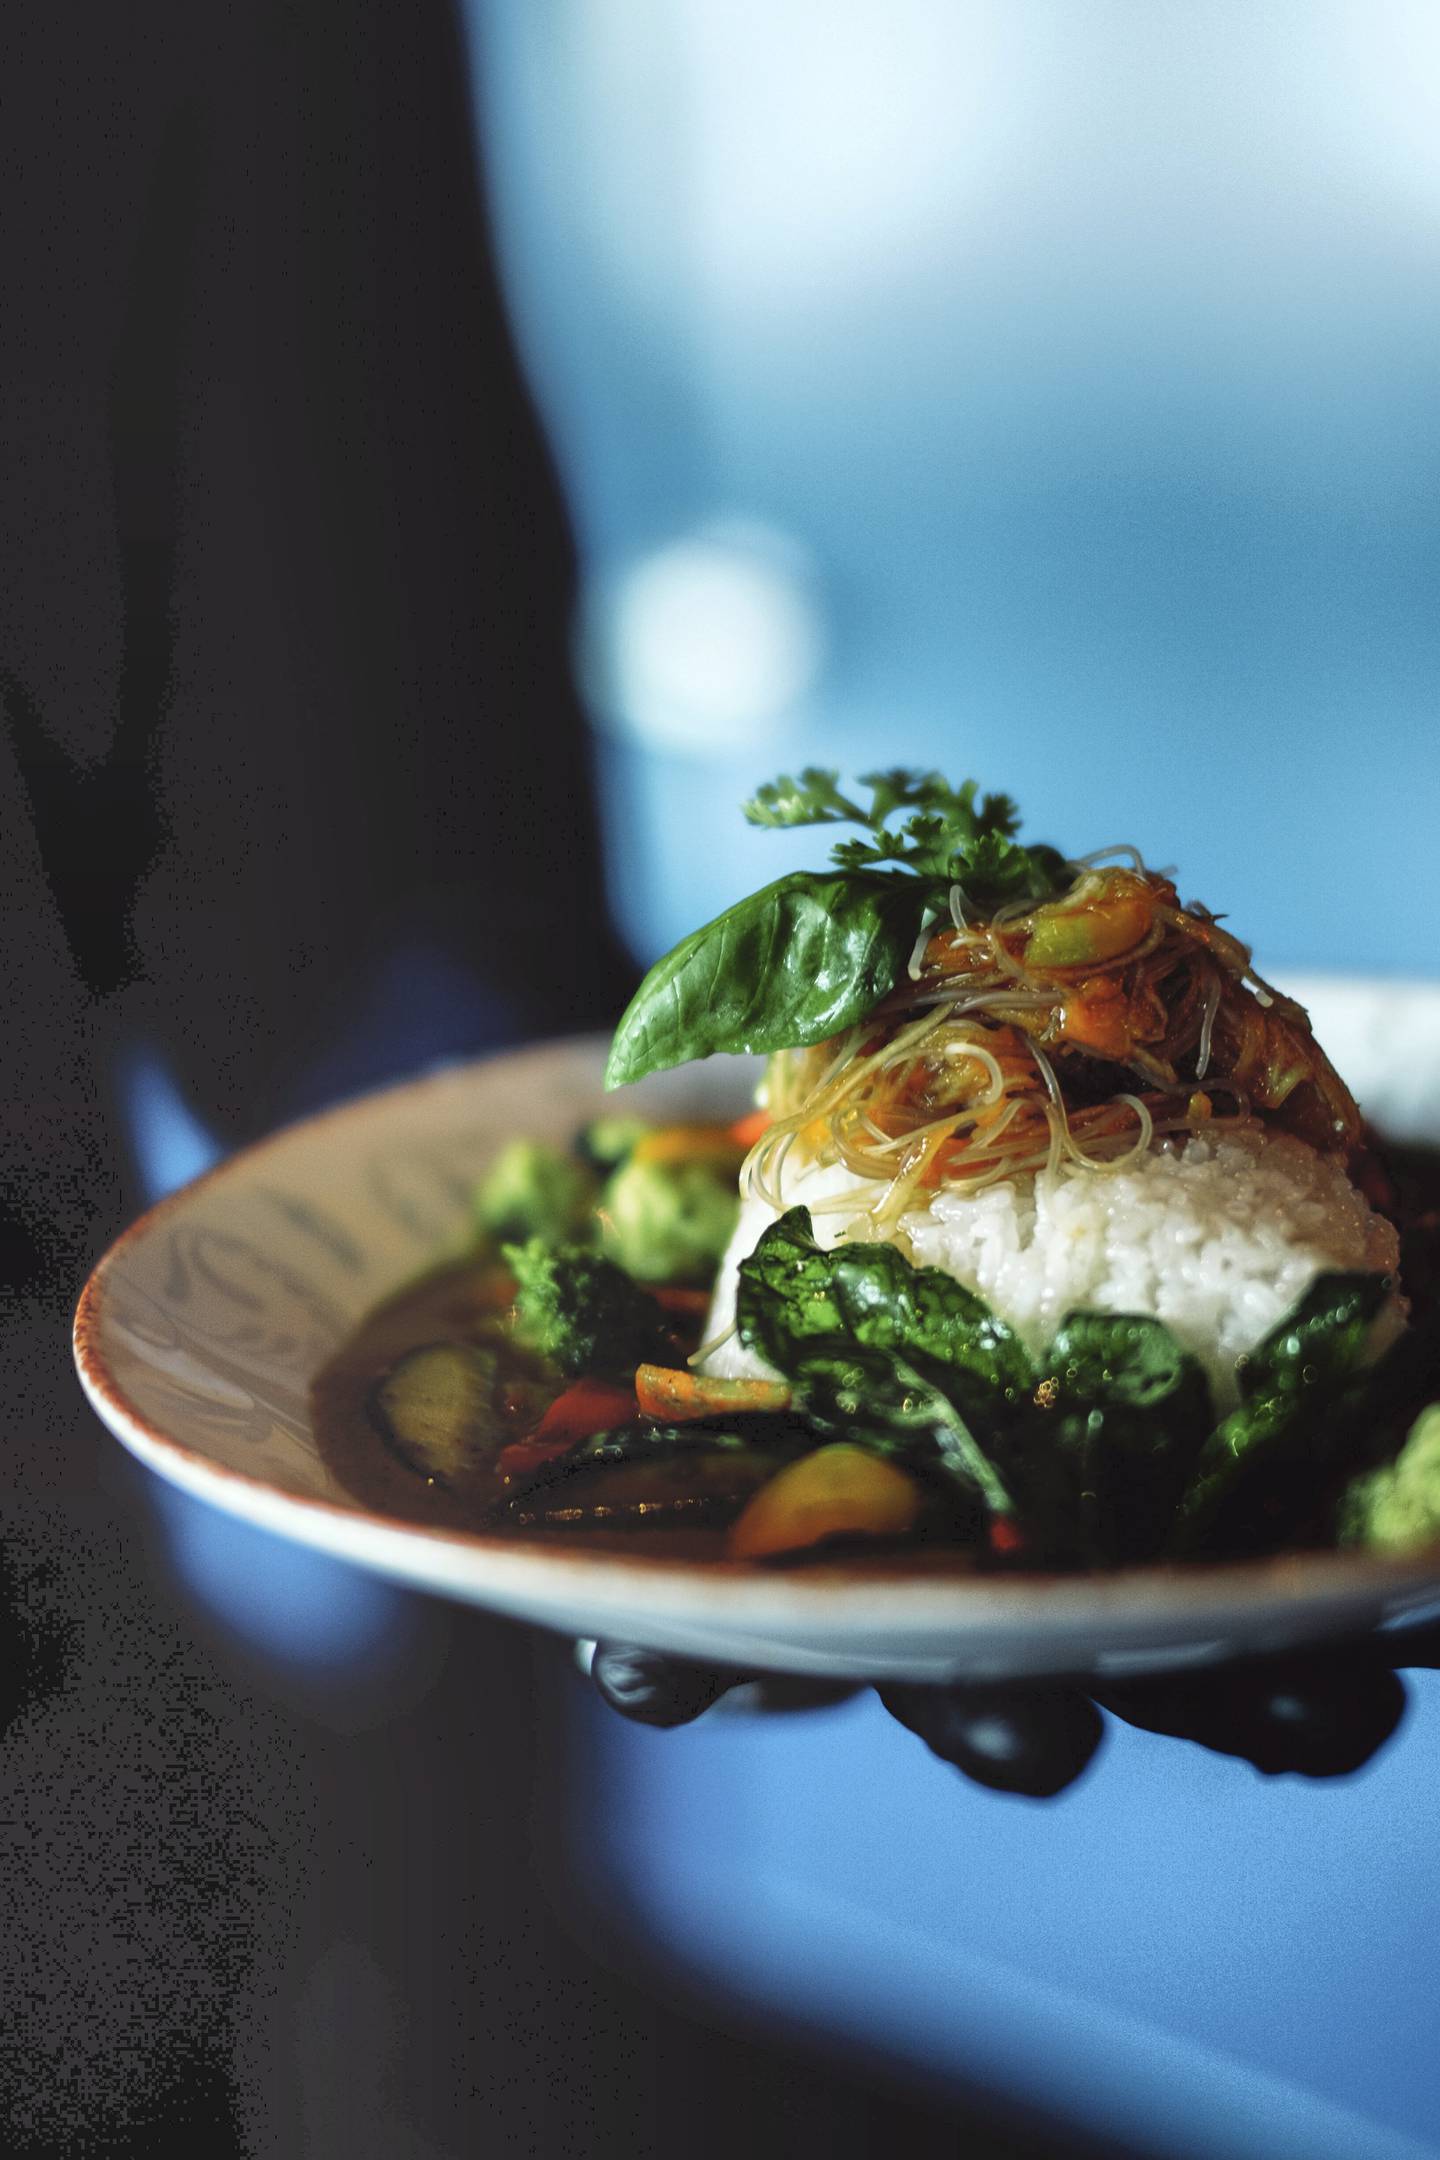 The Thai green curry from Epitome is a stand-out dish. Photo: Epitome